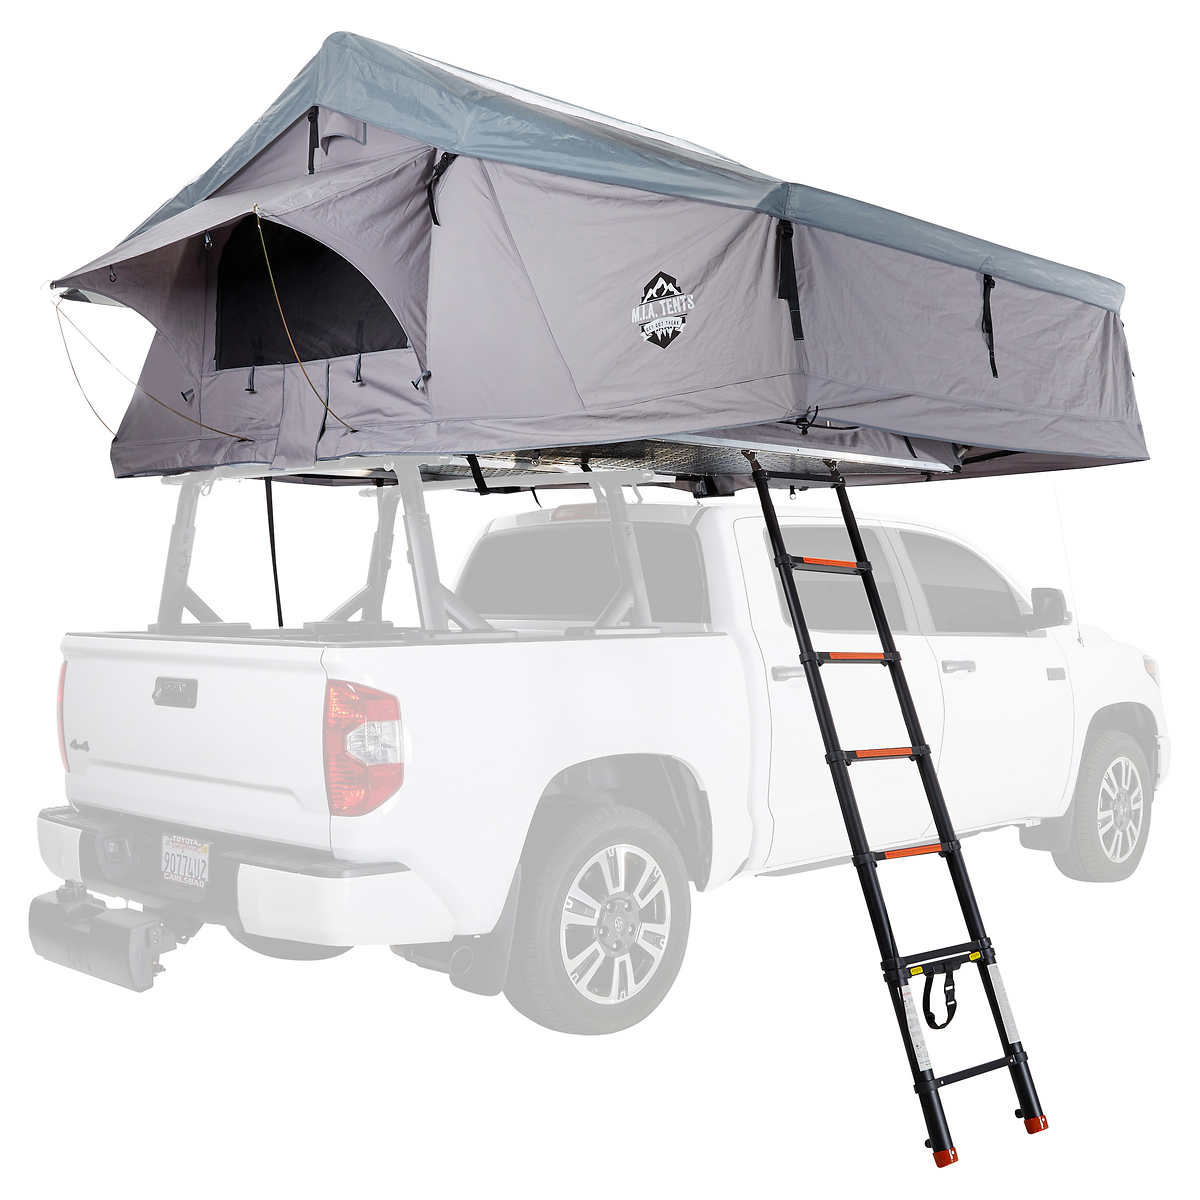 MIA Pioneer Large 2 person Rooftop Tent | Costco